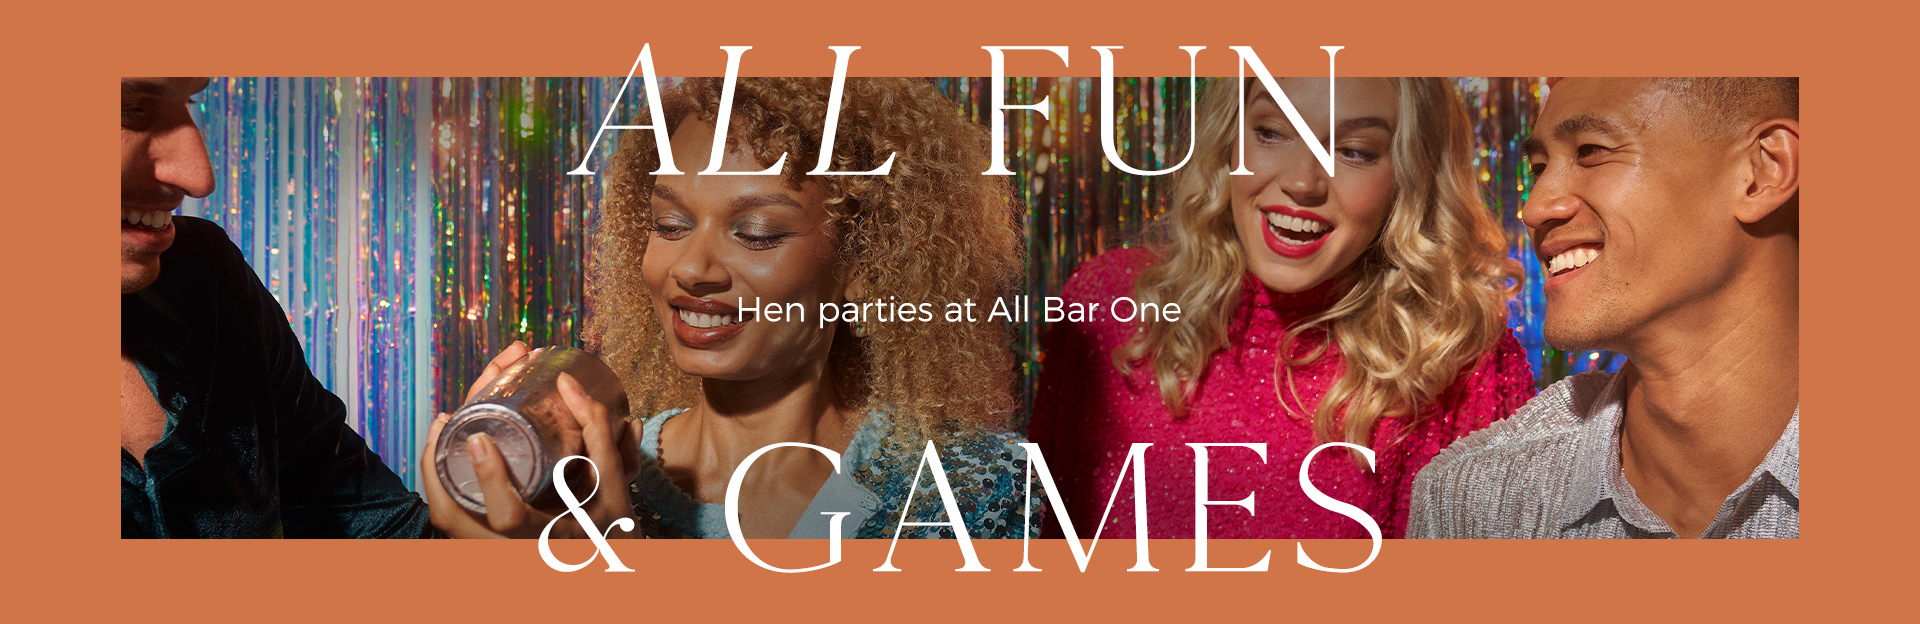 Hen parties at All Bar One Sutton